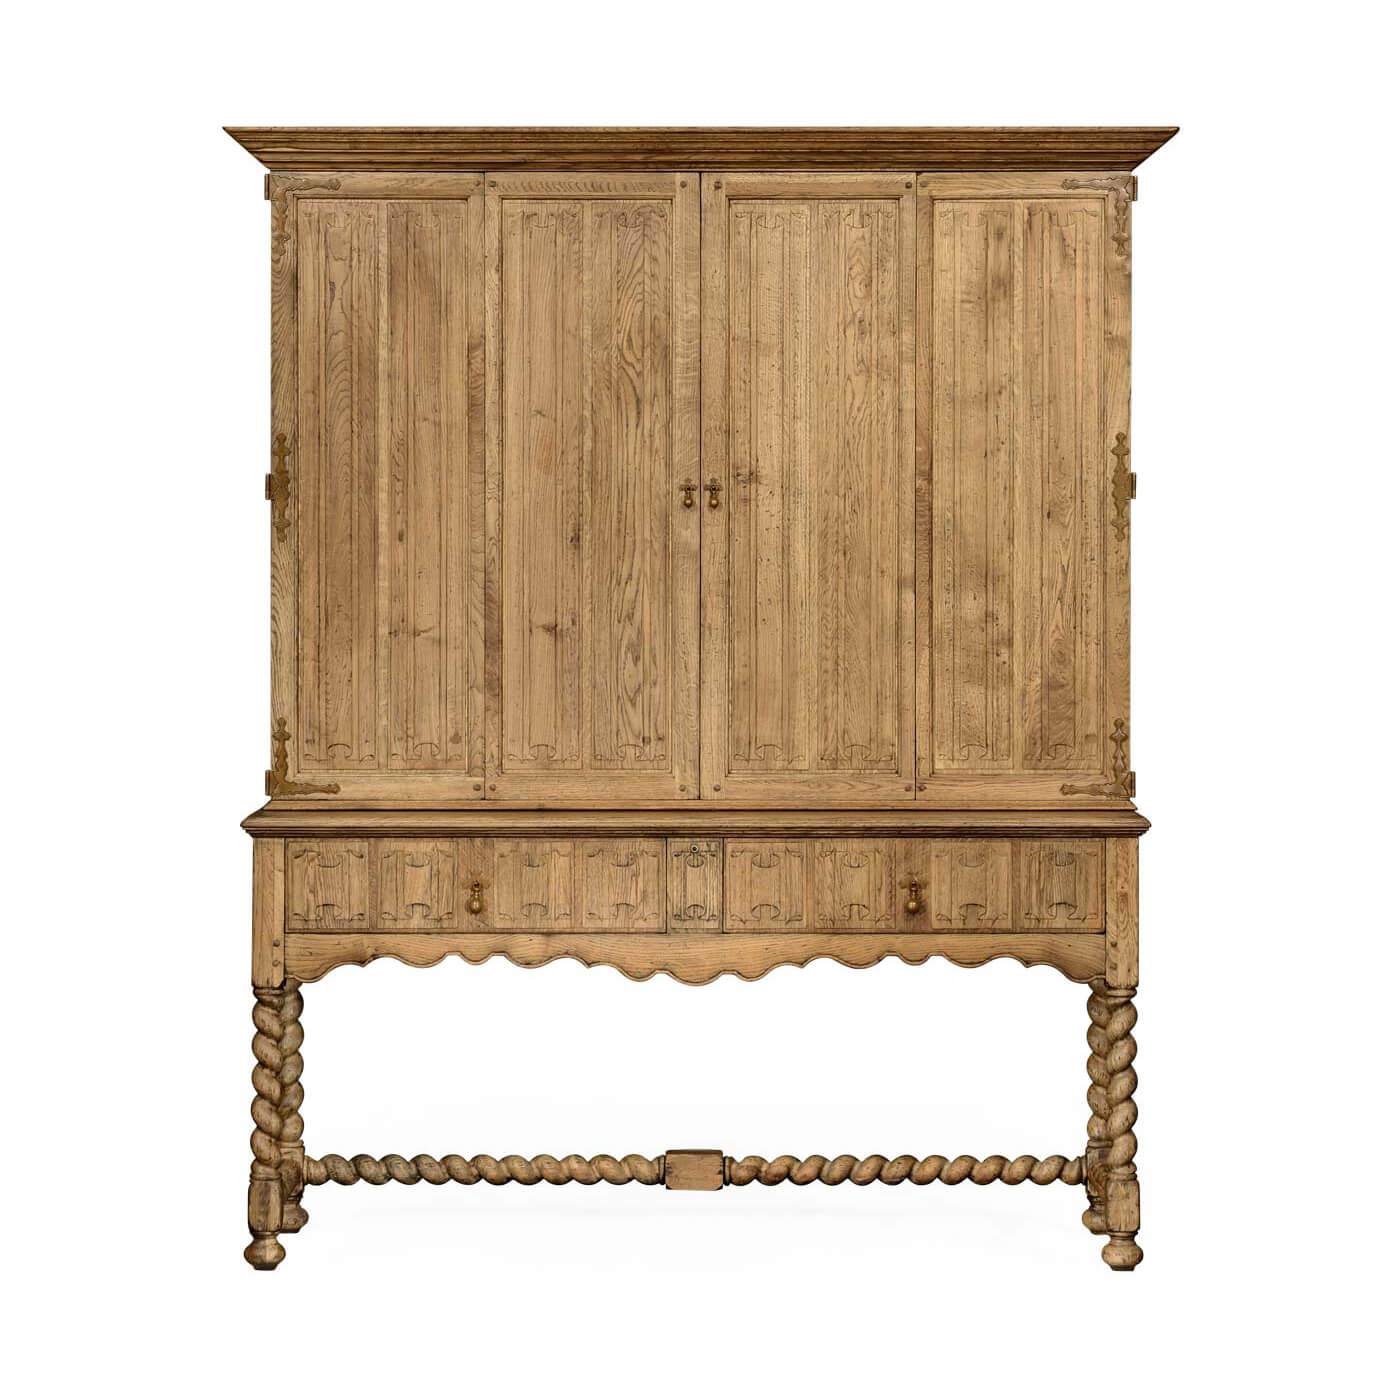 An early European Provincial style carved linen-fold natural oak TV cabinet with hinged fold-away doors and a built-in infrared repeater system hidden behind the drawers. With an open base beneath two drawers with additional linen-fold carvings